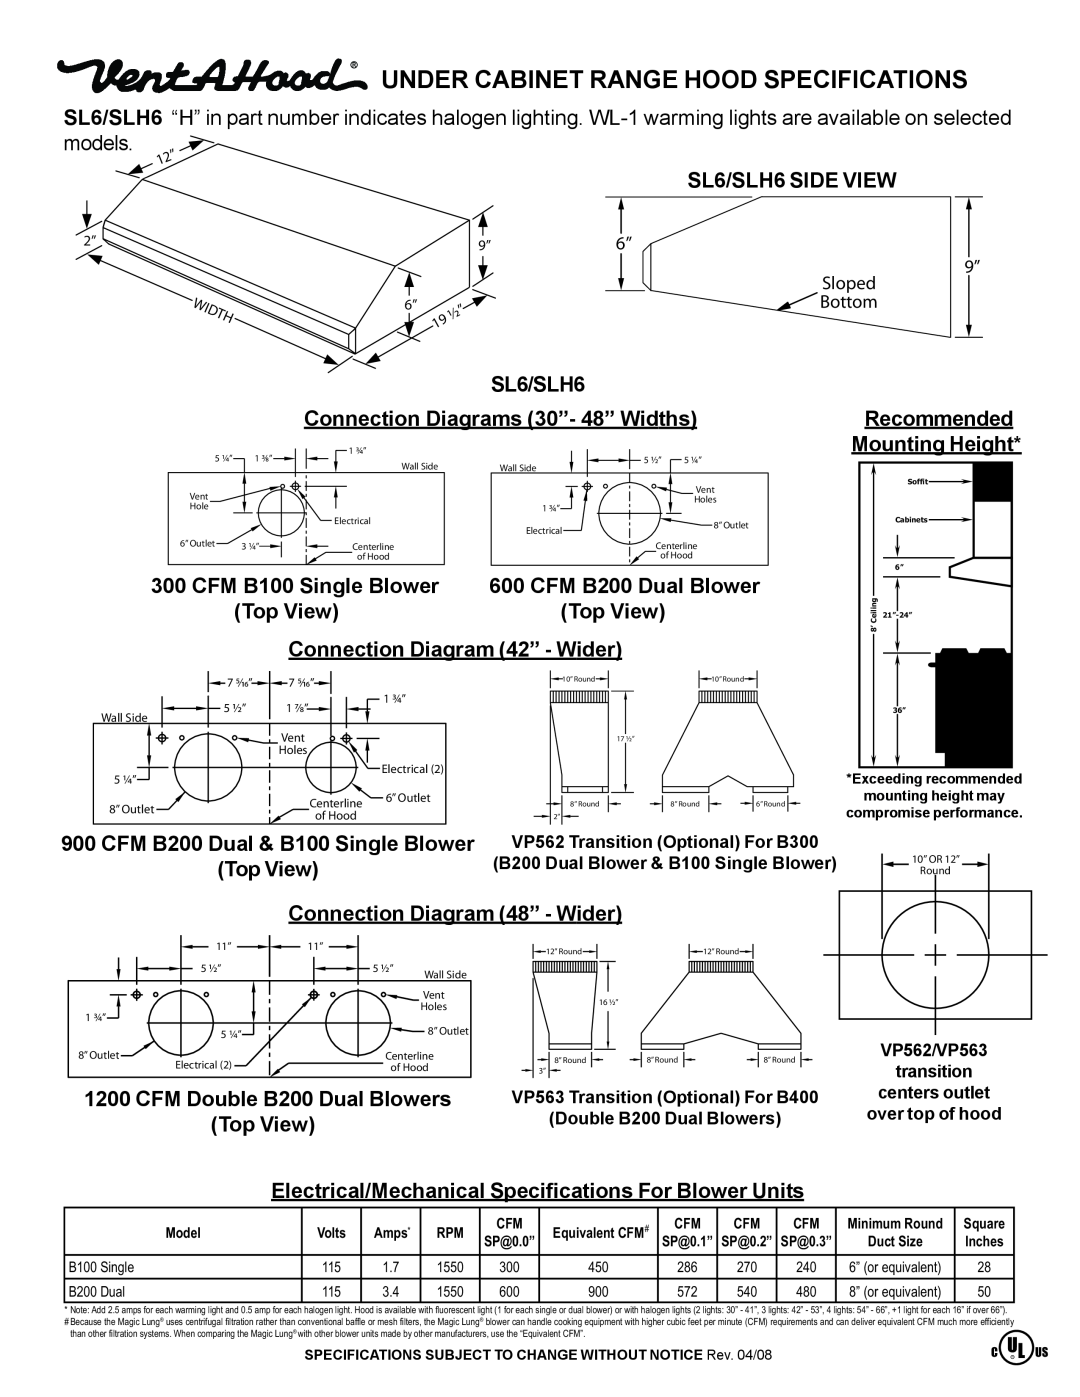 Vent-a-Hood SL6 specifications Under Cabinet Range Hood Specifications 